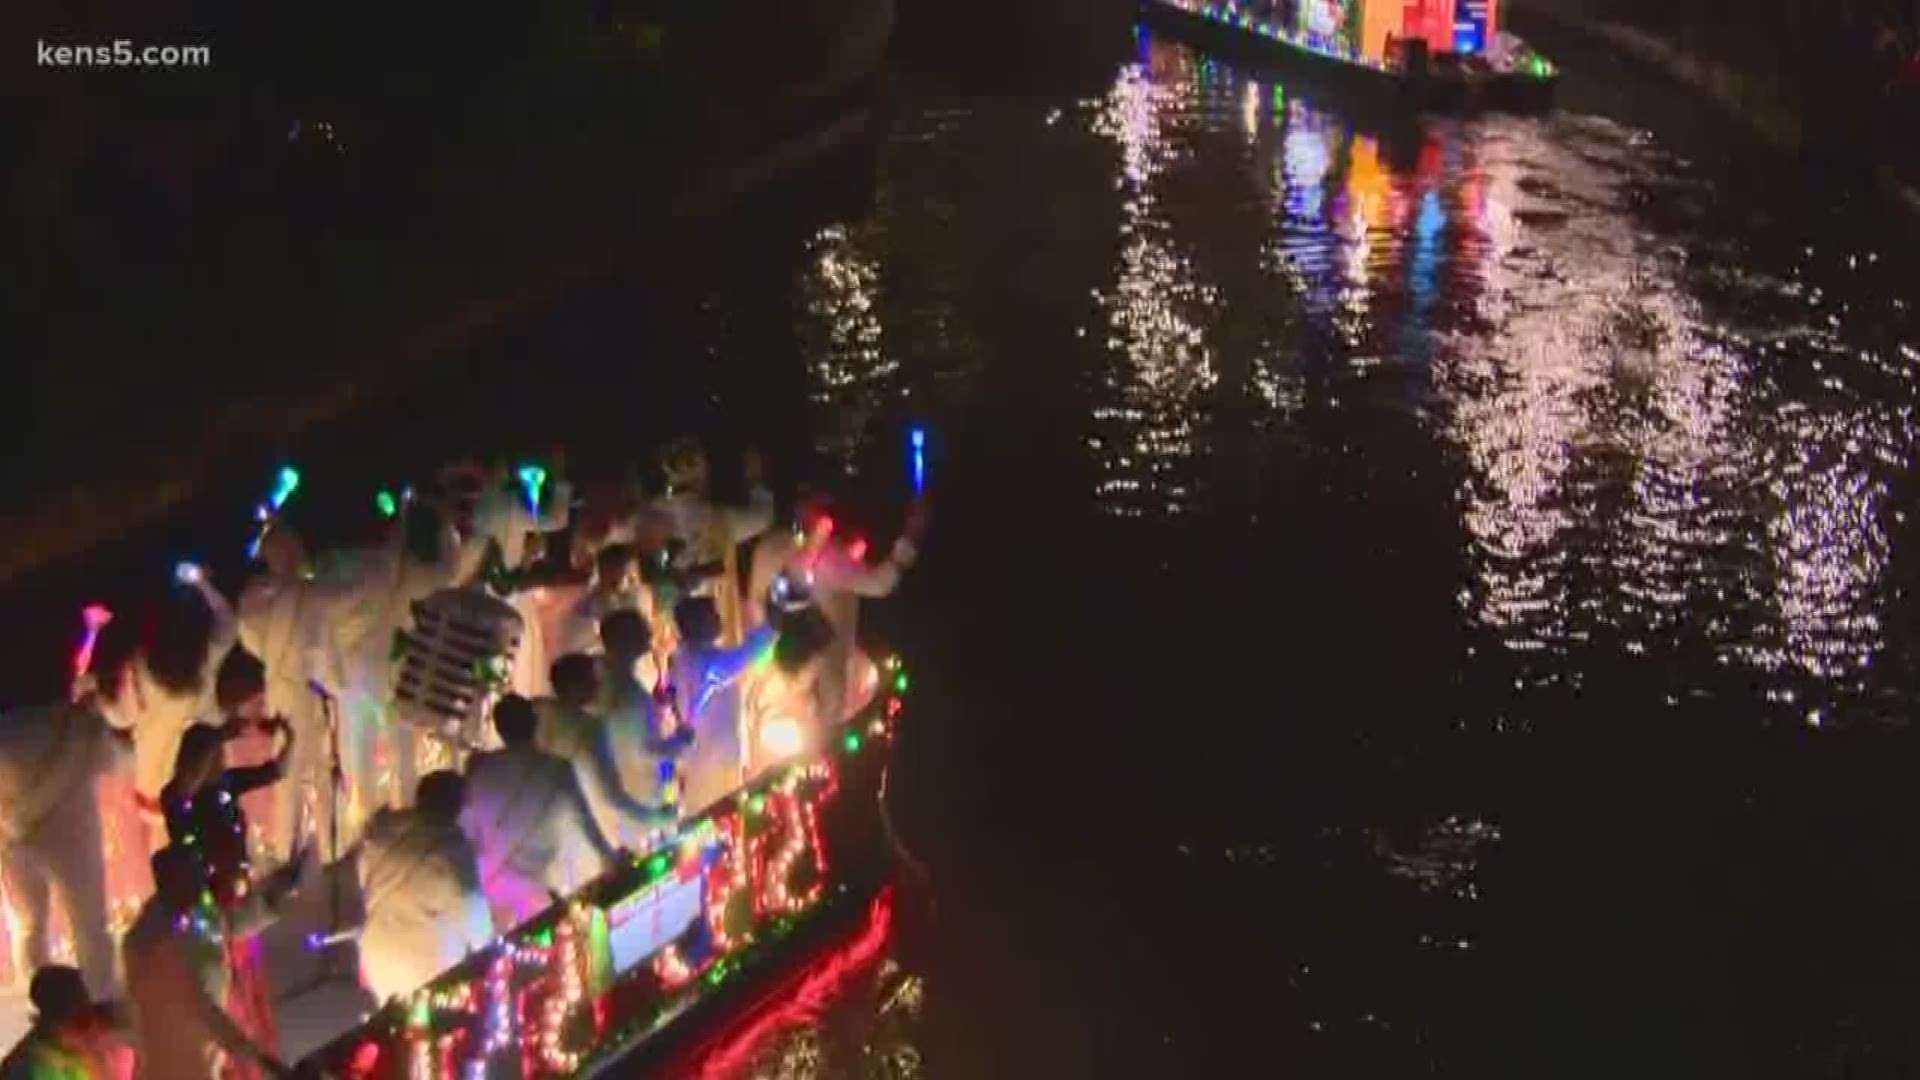 The lights, music, floats and families were aplenty at this year's parade, despite the muggy weather.